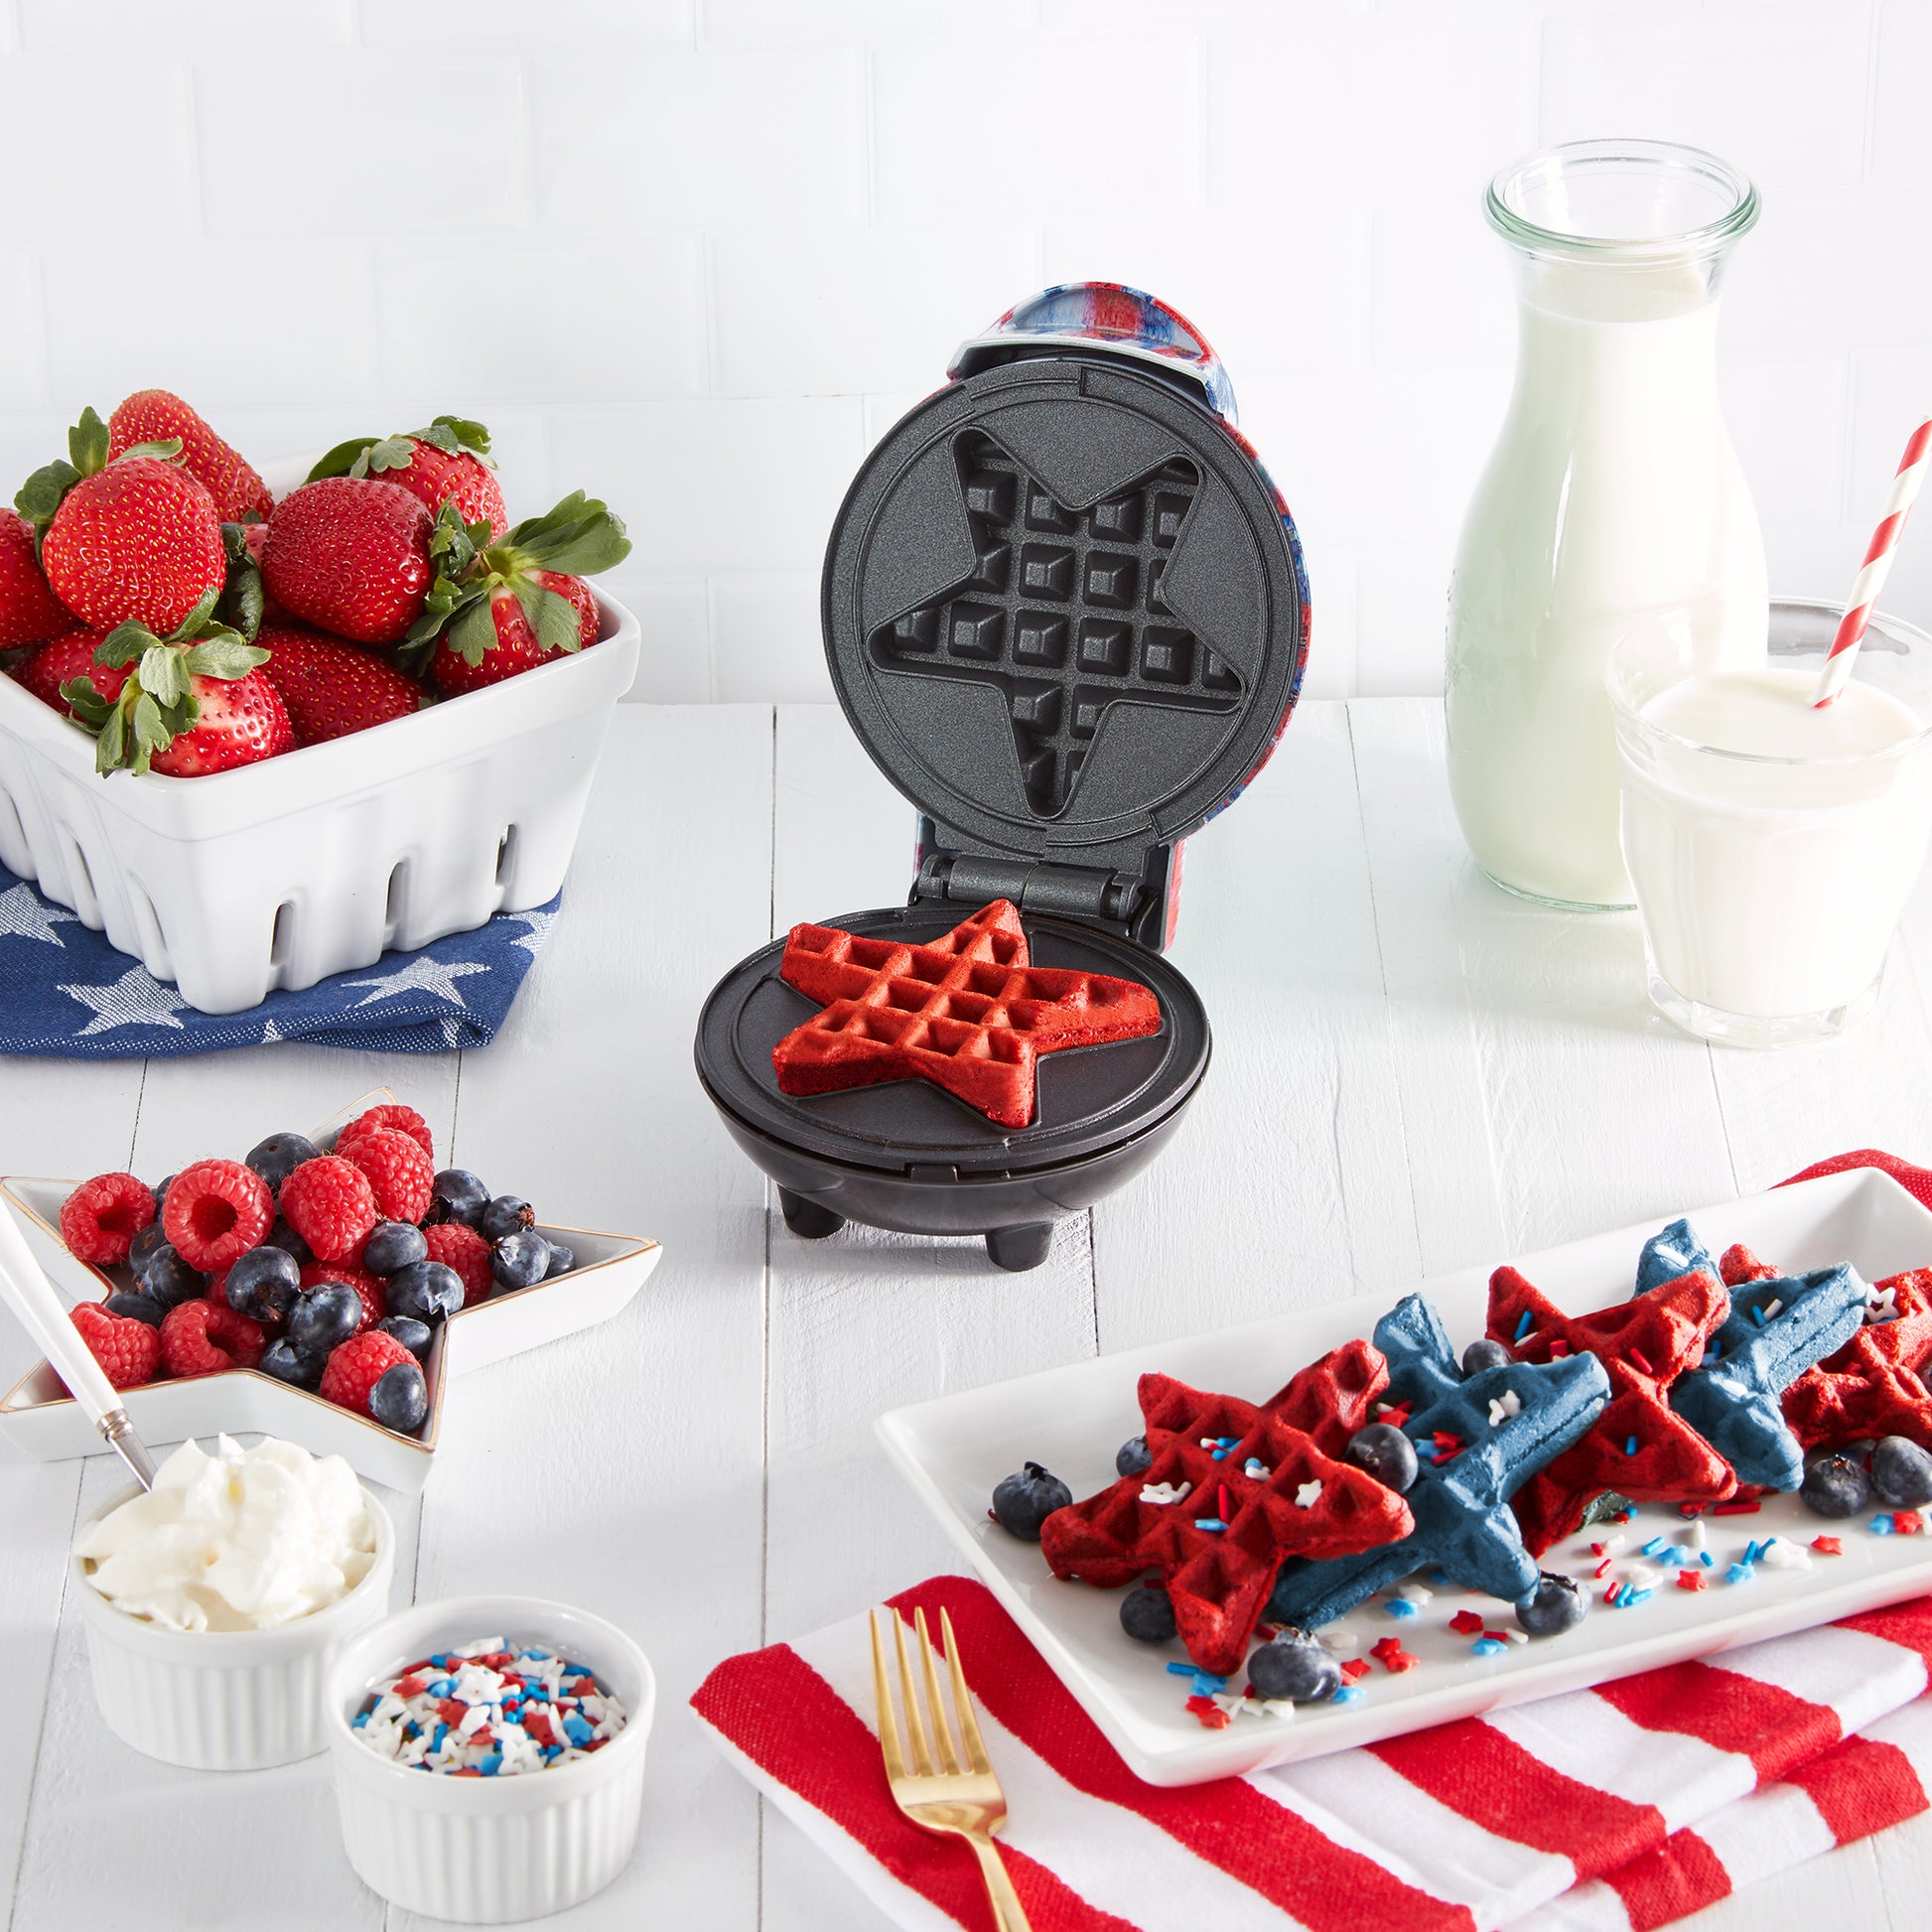 Dash Bunny Mini Waffle Maker review - Reviewed